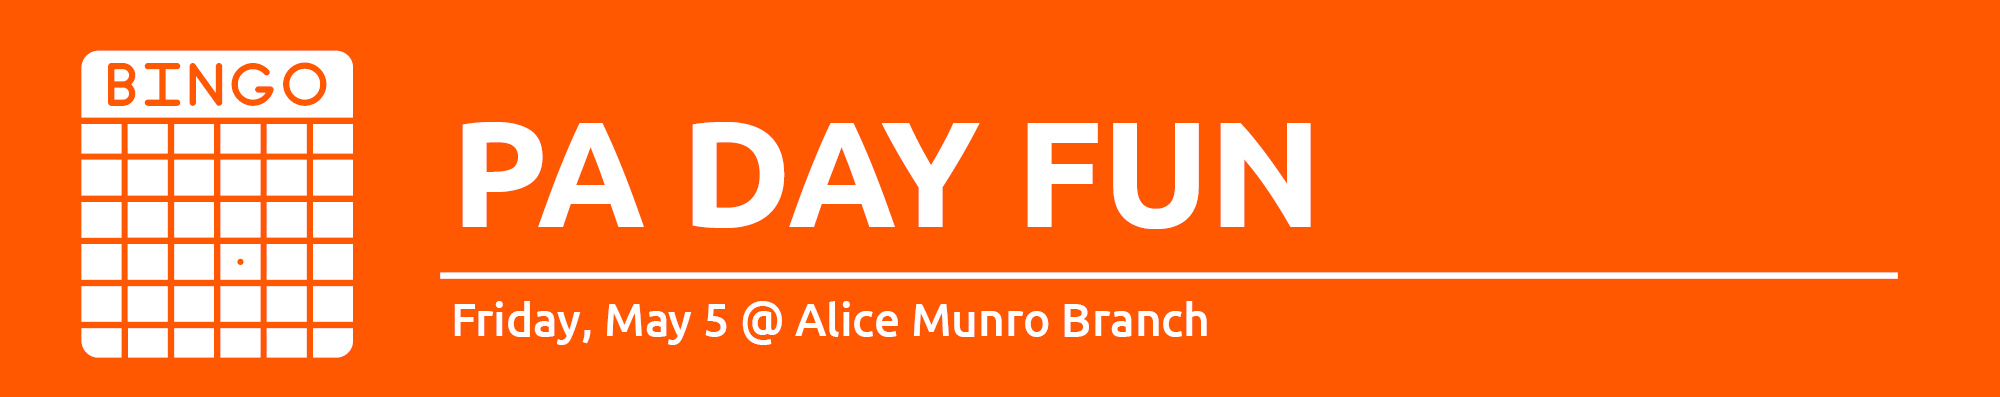 Illustration of a Bingo card with text promoting PA Day Fun at the Alice Munro Branch, Wingham